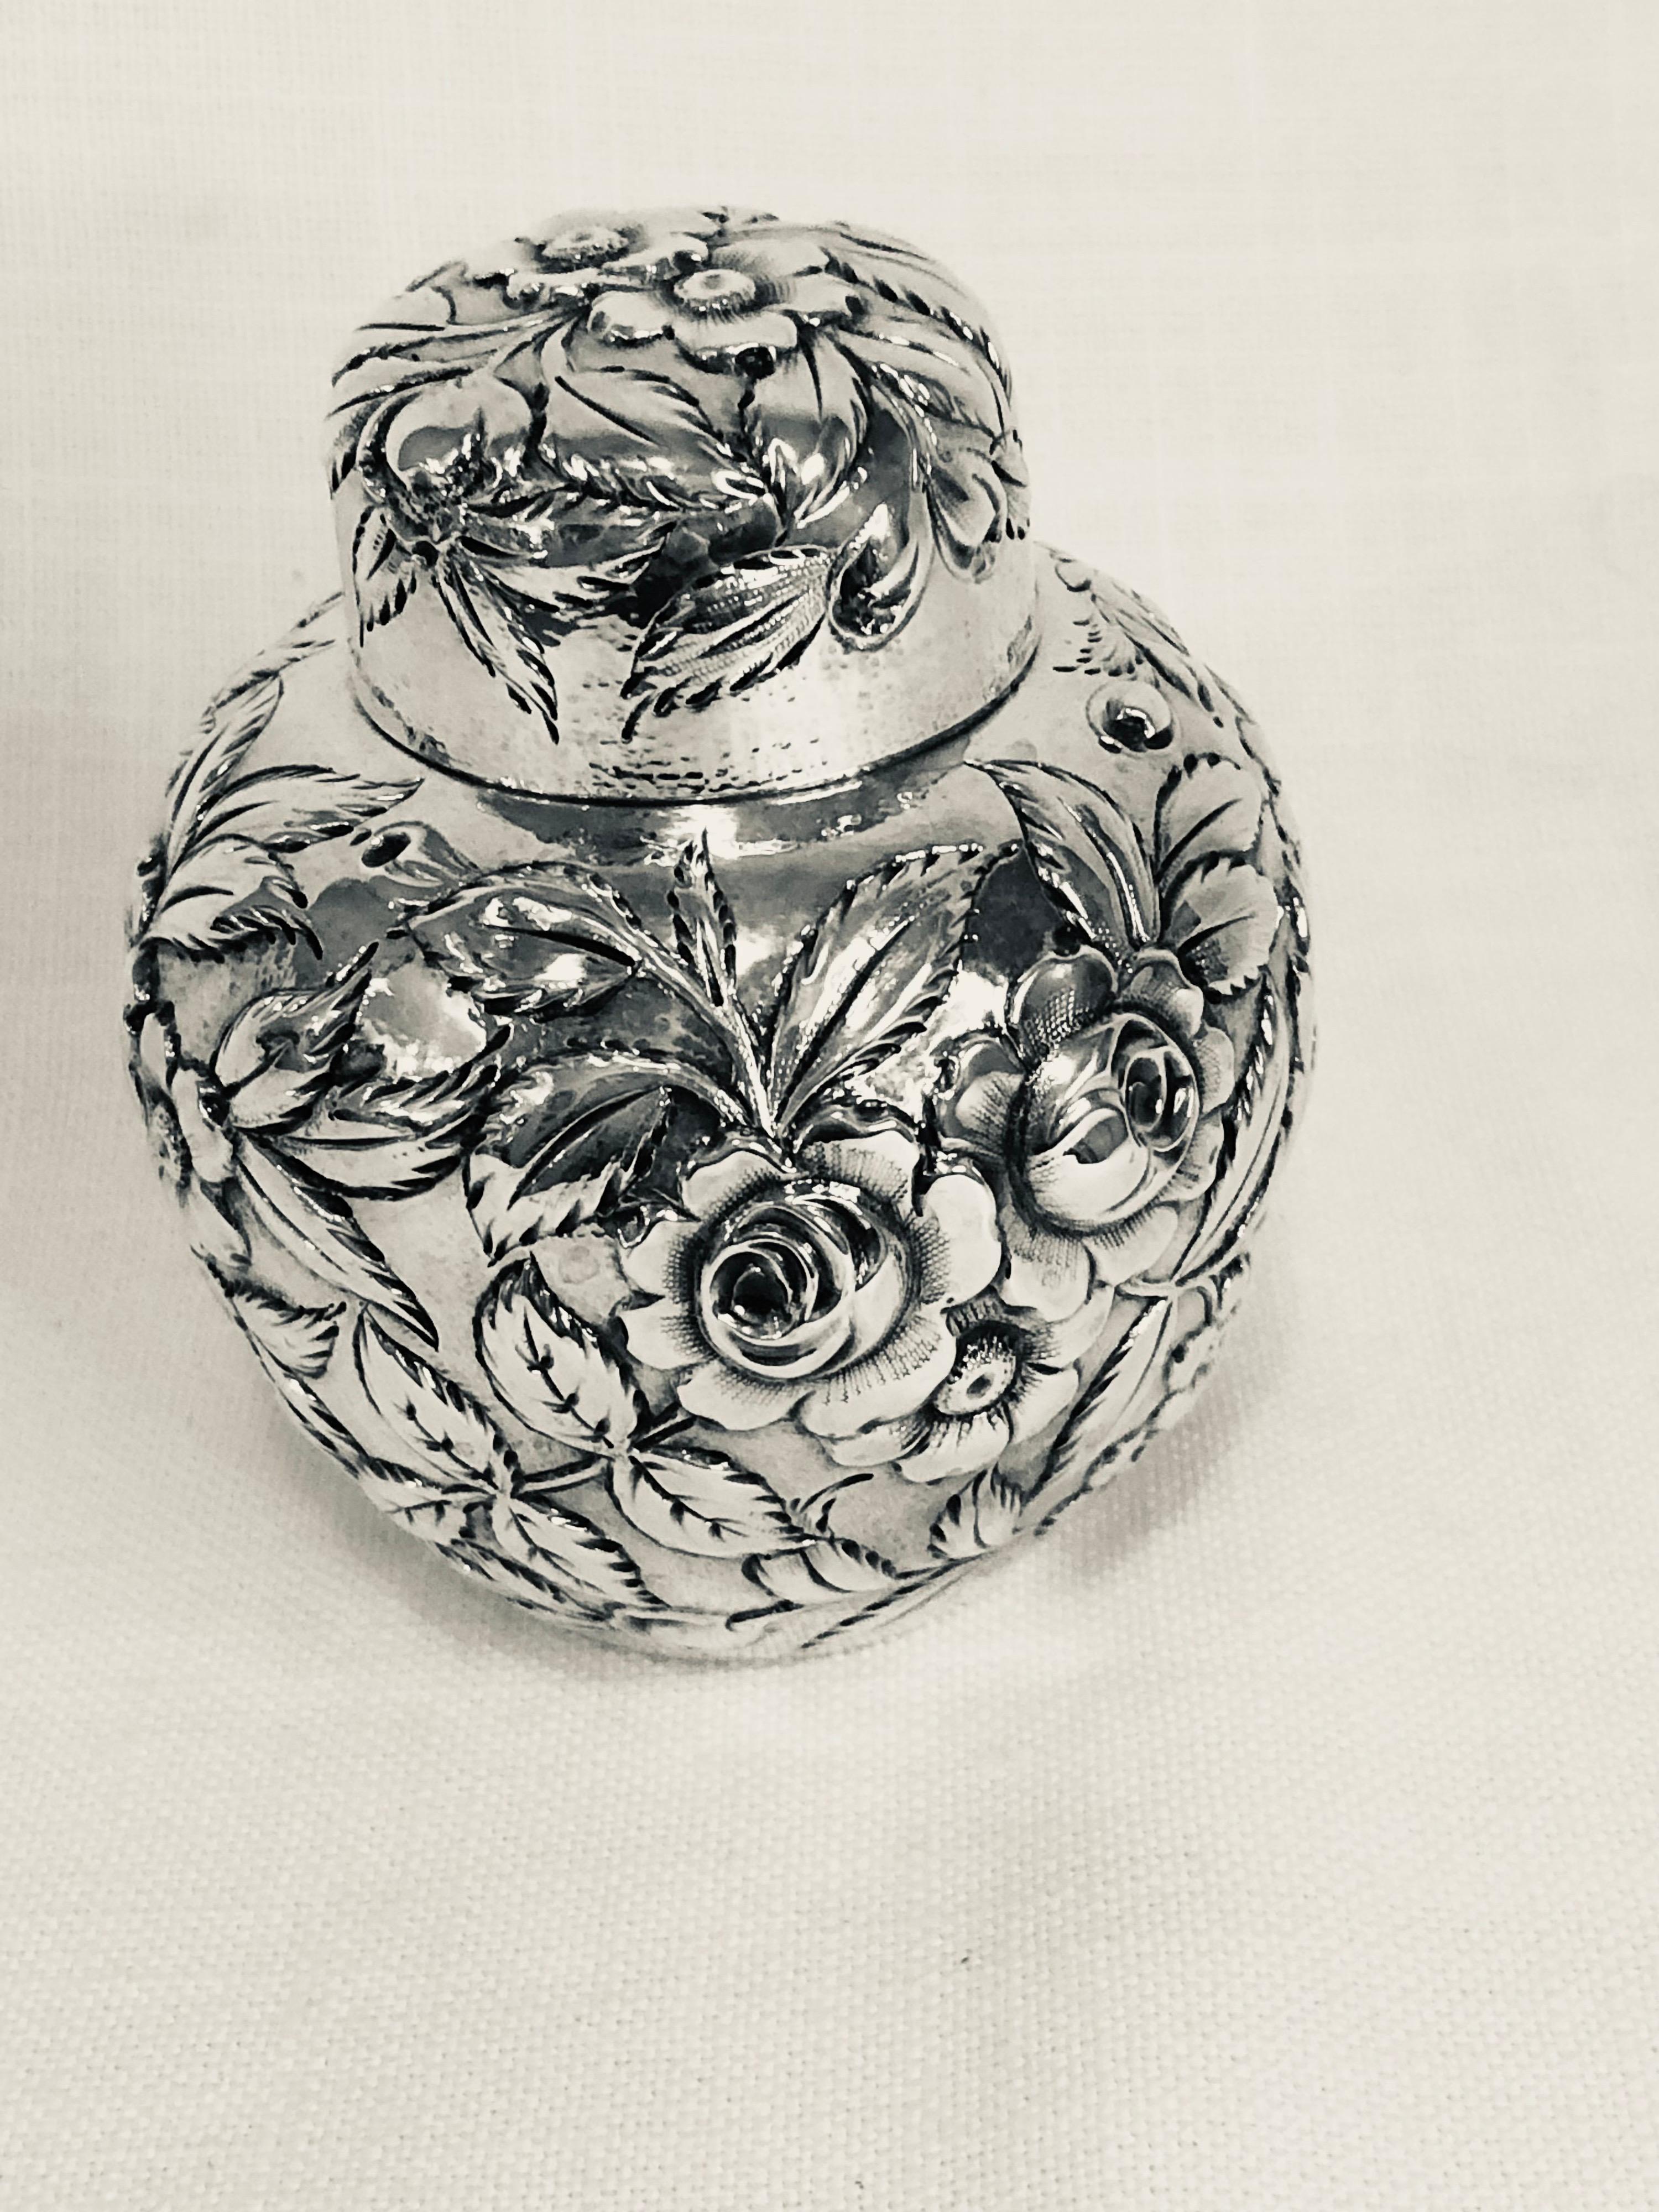 Repoussé Signed S. Kirk Sterling Silver Tea Caddy with Repousse on All Sides and Cover